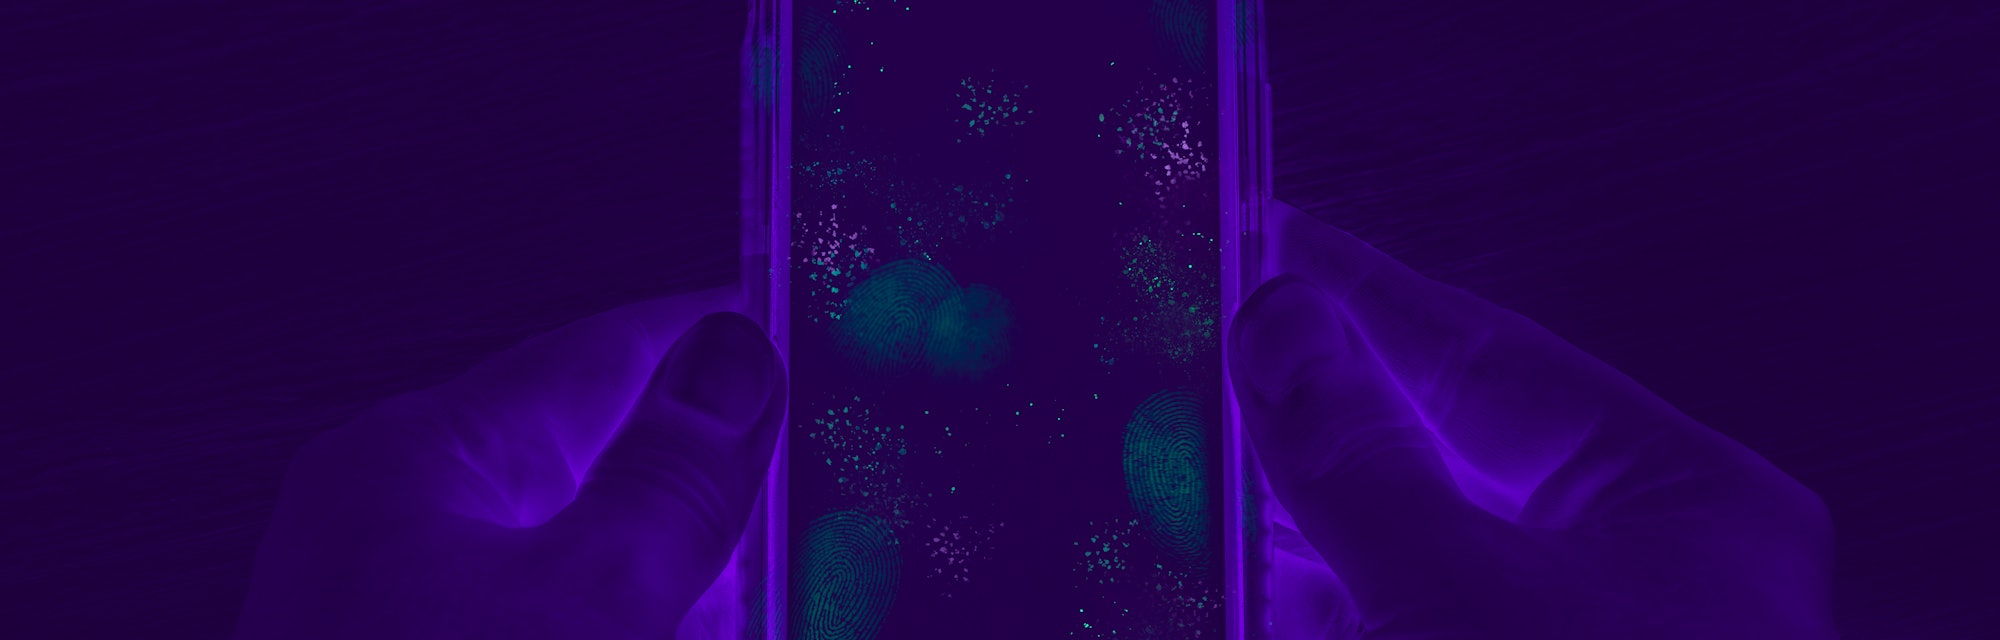 Hands holding cell phone with dirty contaminated touch screen - UV Blacklight exposing infectious ba...